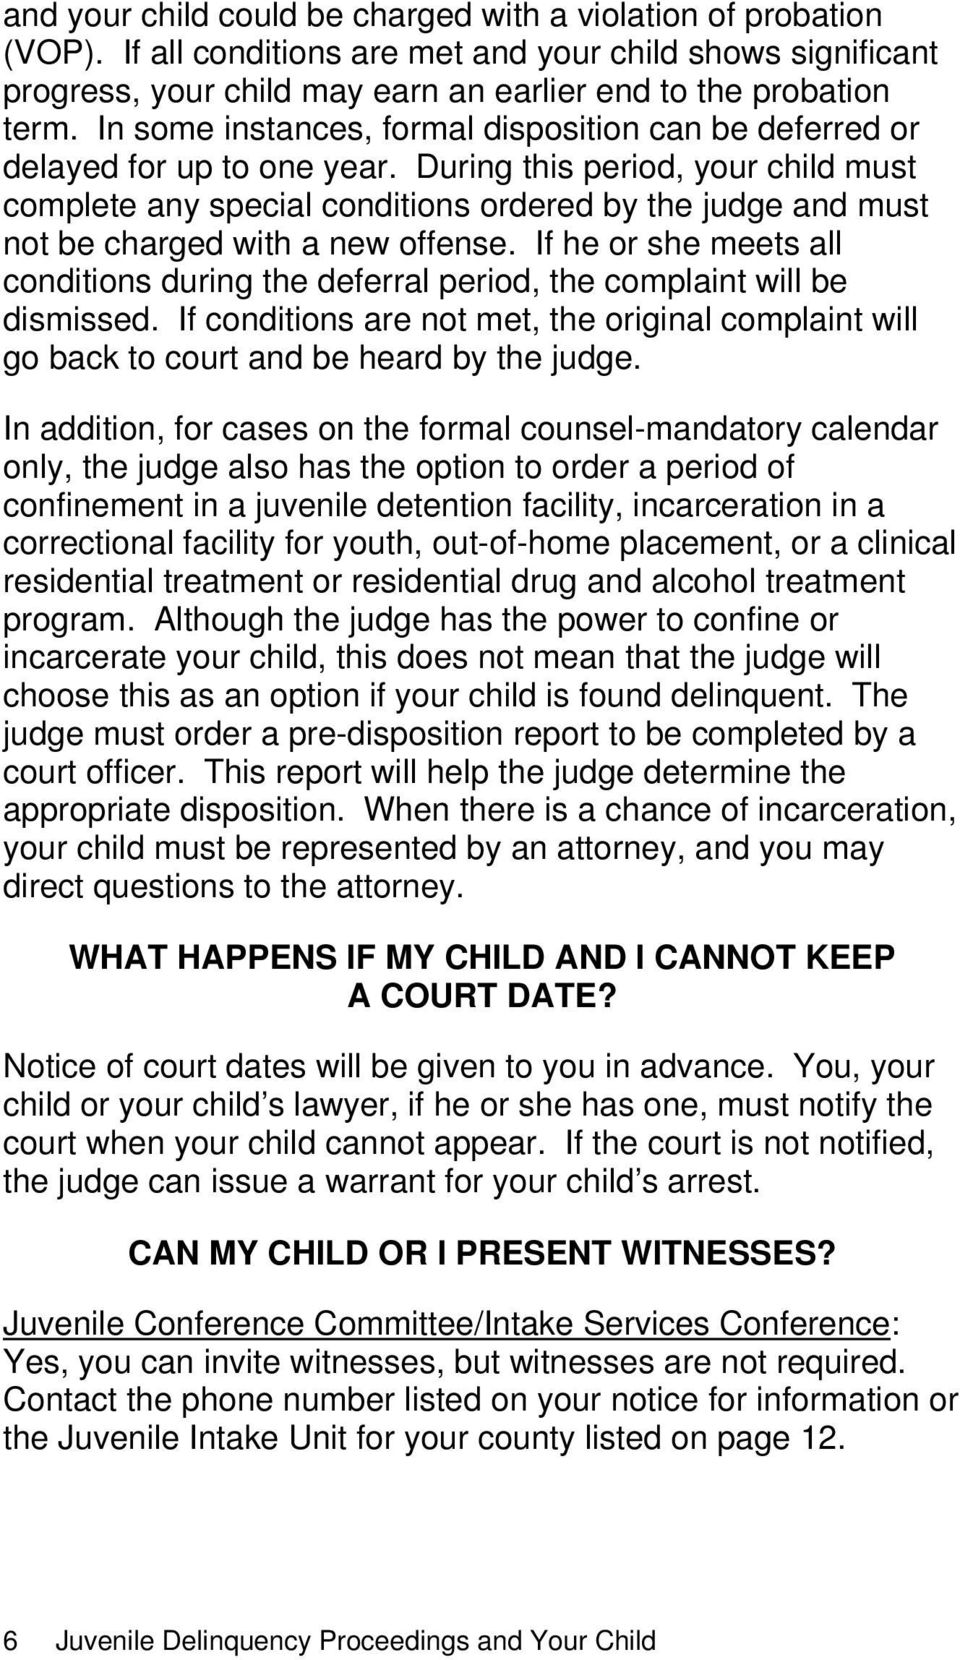 During this period, your child must complete any special conditions ordered by the judge and must not be charged with a new offense.